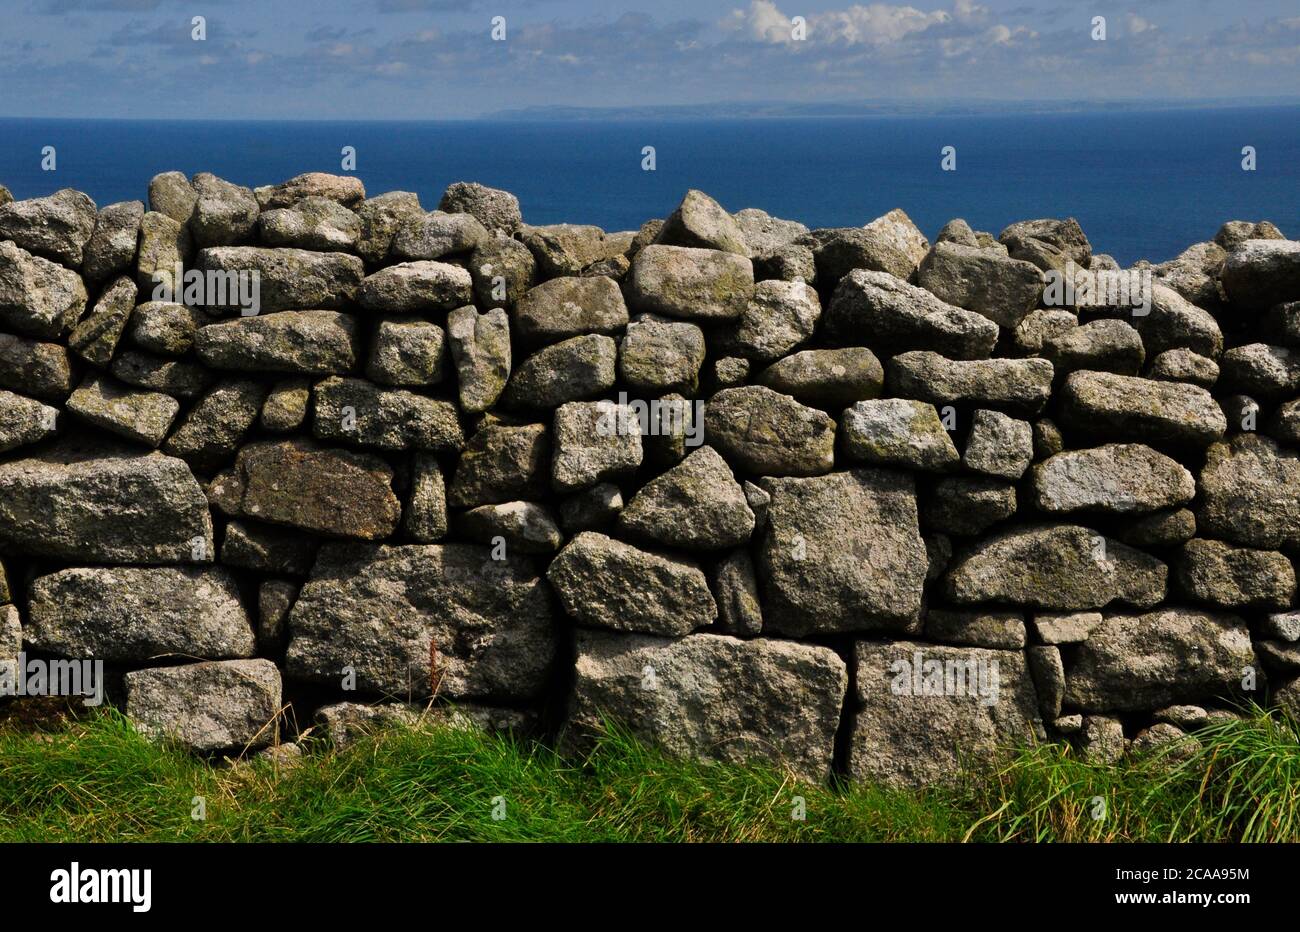 Random laid granite stone wall on the island of Lundy in the Bristol channel off the north coast of Devon which is visible on the horizon. Stock Photo